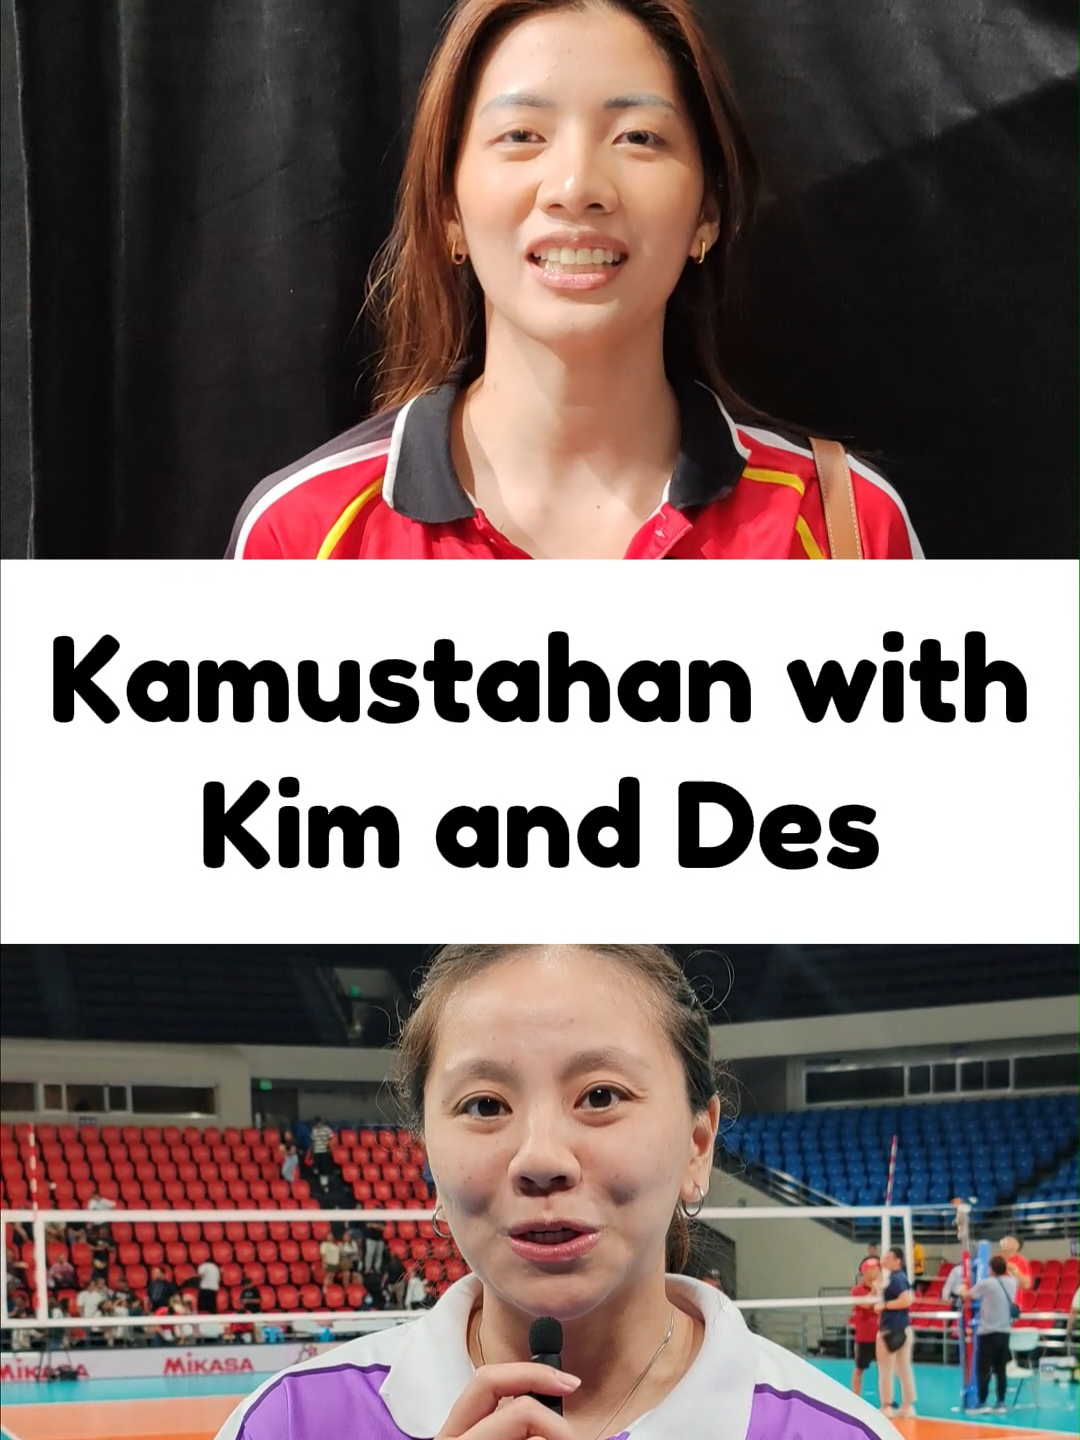 #PVLExclusive: Kamustahan with Kim and Des. We're anticipating your return to the court, Kim and Des. Your resilience and dedication inspire us all, and we'll be here cheering you on every step of the way. See you soon on the court @kiannady_ and @eyitsmedes_ 💖 #PVL2024 #TheHeartOfVolleyball #SportsOnTikTok